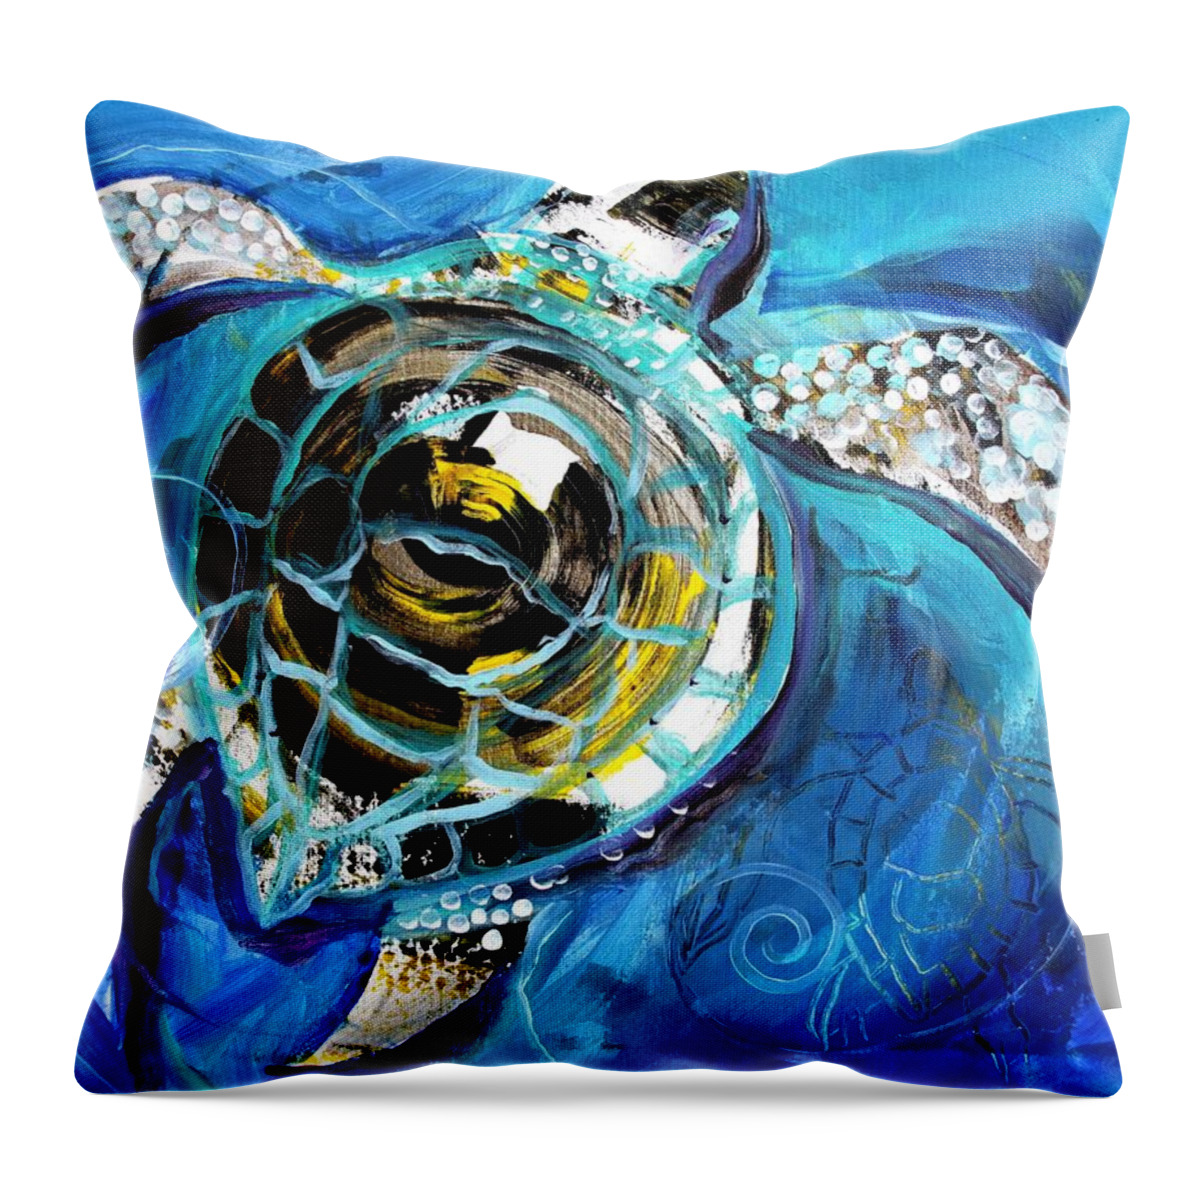 Sea Turtle Throw Pillow featuring the painting Abstract Sea Turtle in C Minor by J Vincent Scarpace